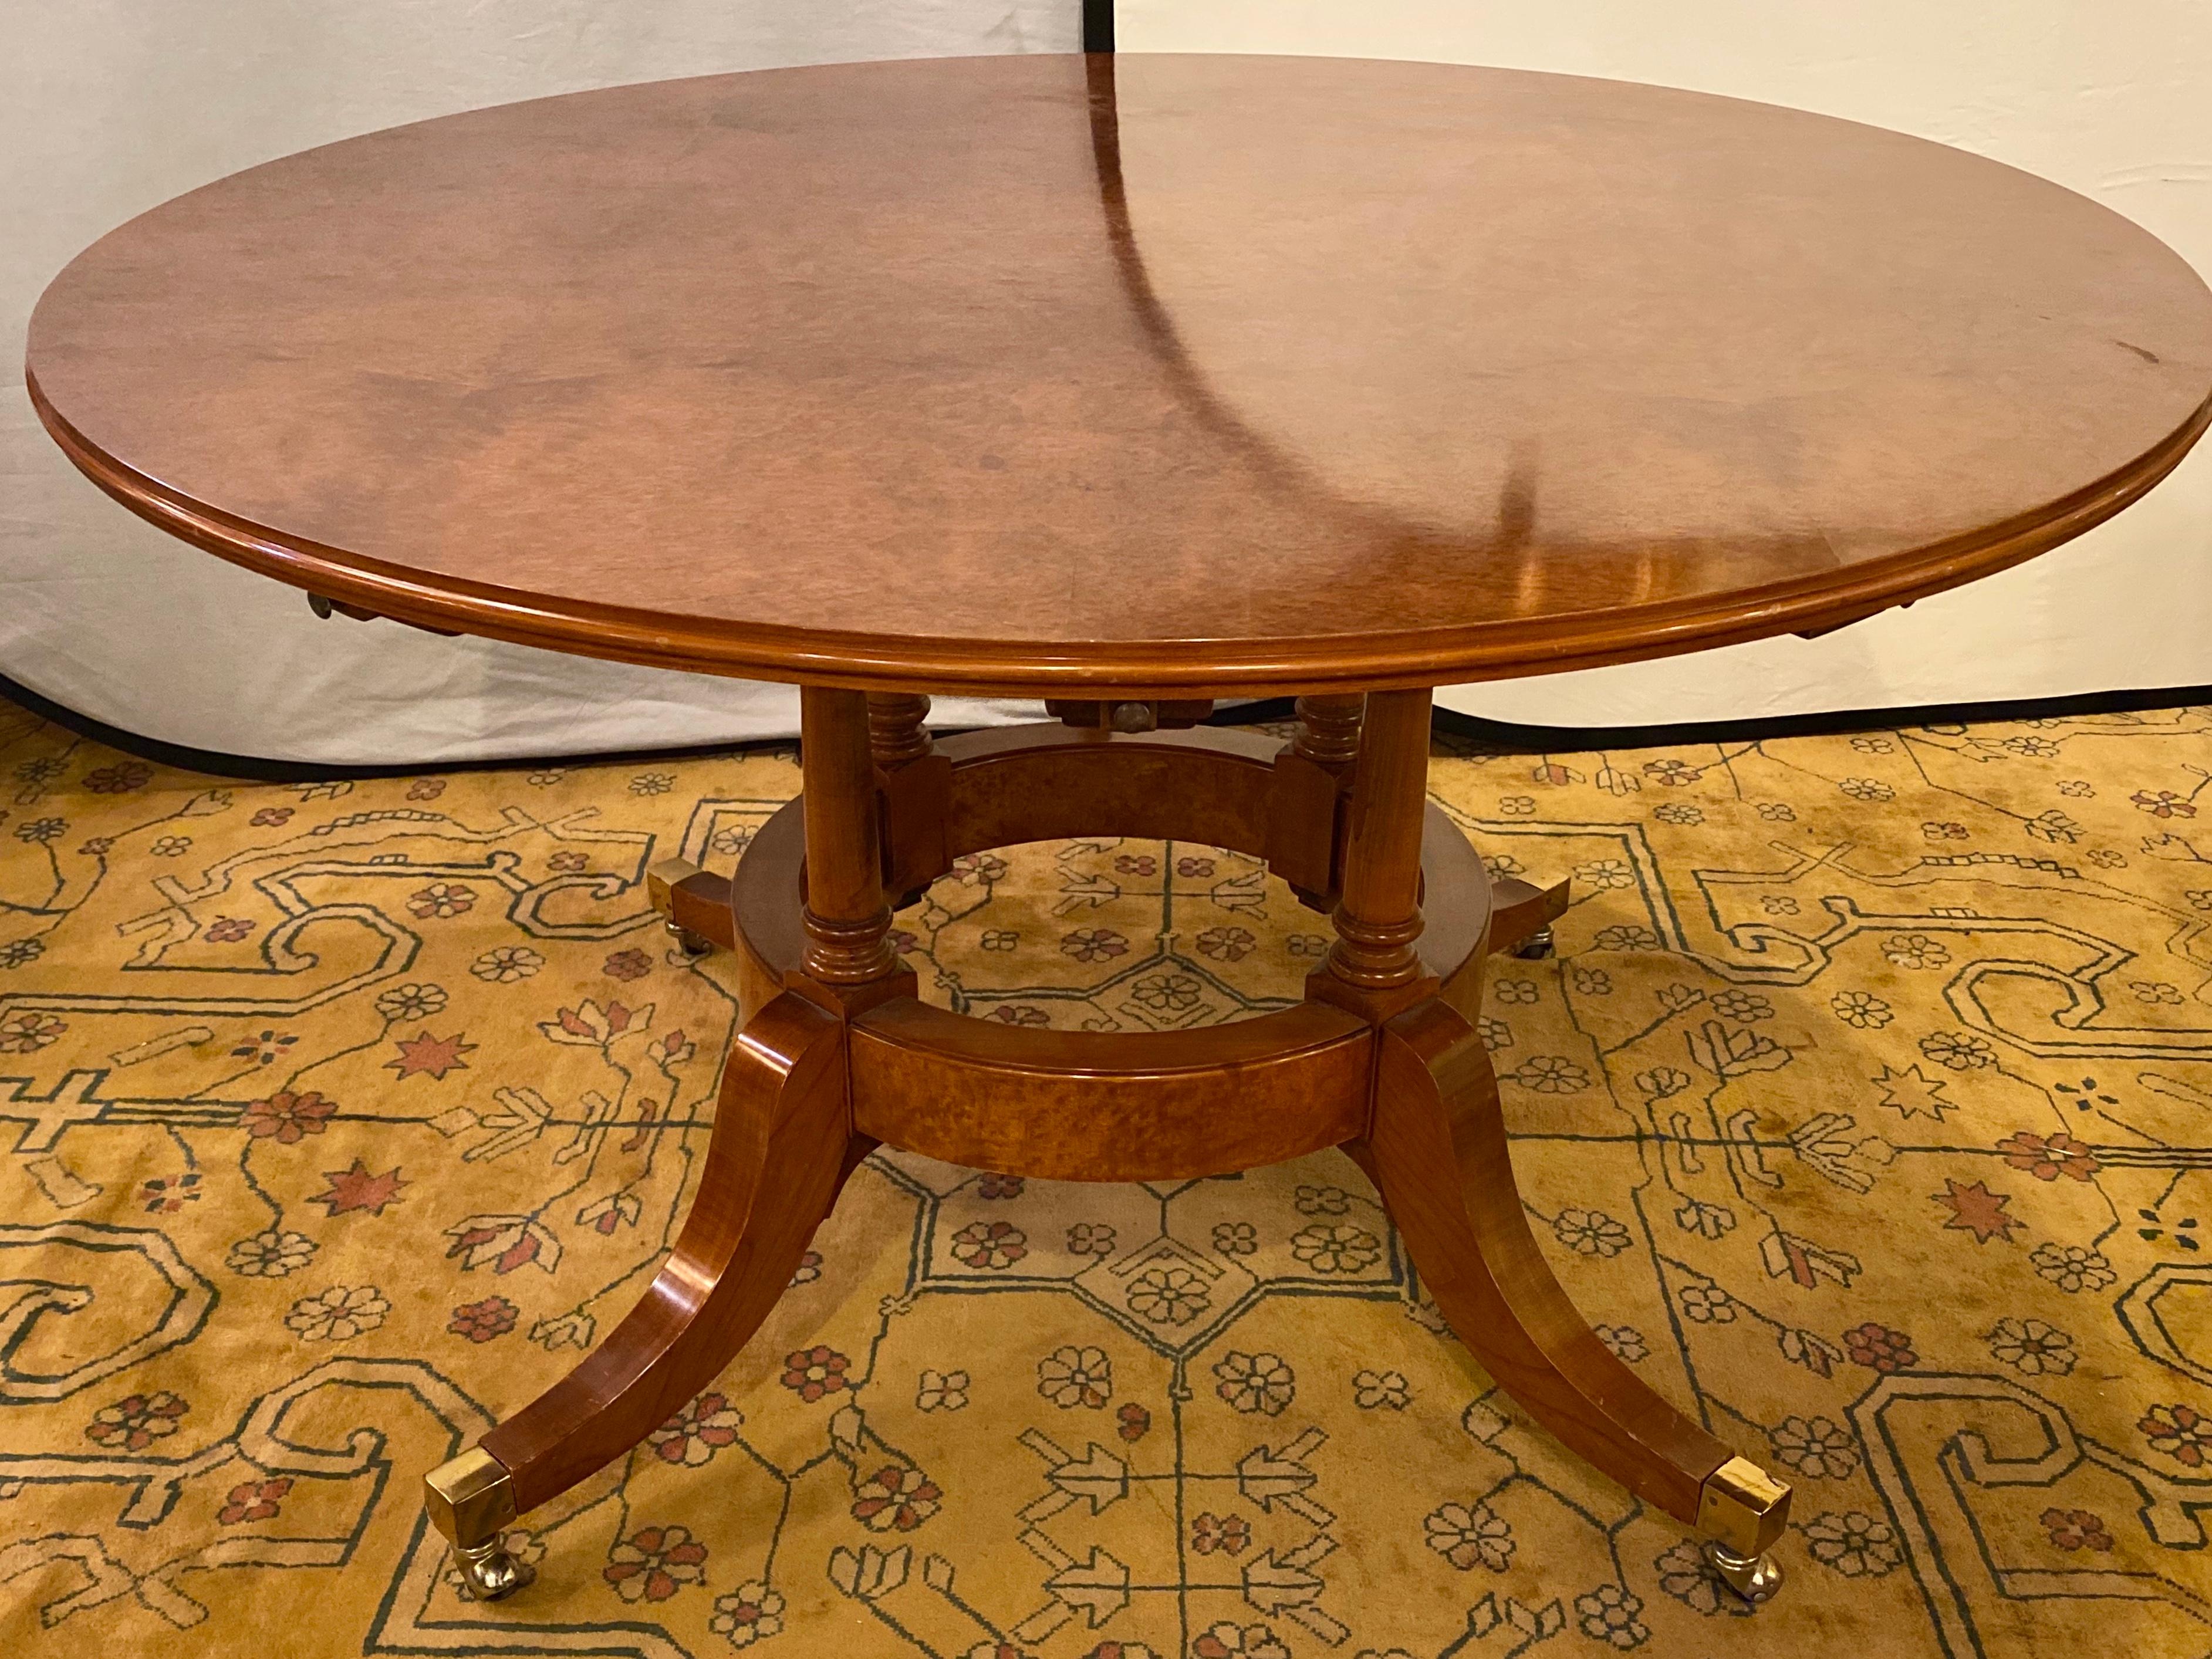 Francesco Molon Regency style dining center table by Giemme. Spectacular tortoise finished tabletop set on quad legged base having extension leafs measuring 11 inches each. The whole supported by brass casters on strong easy to move wheels. The